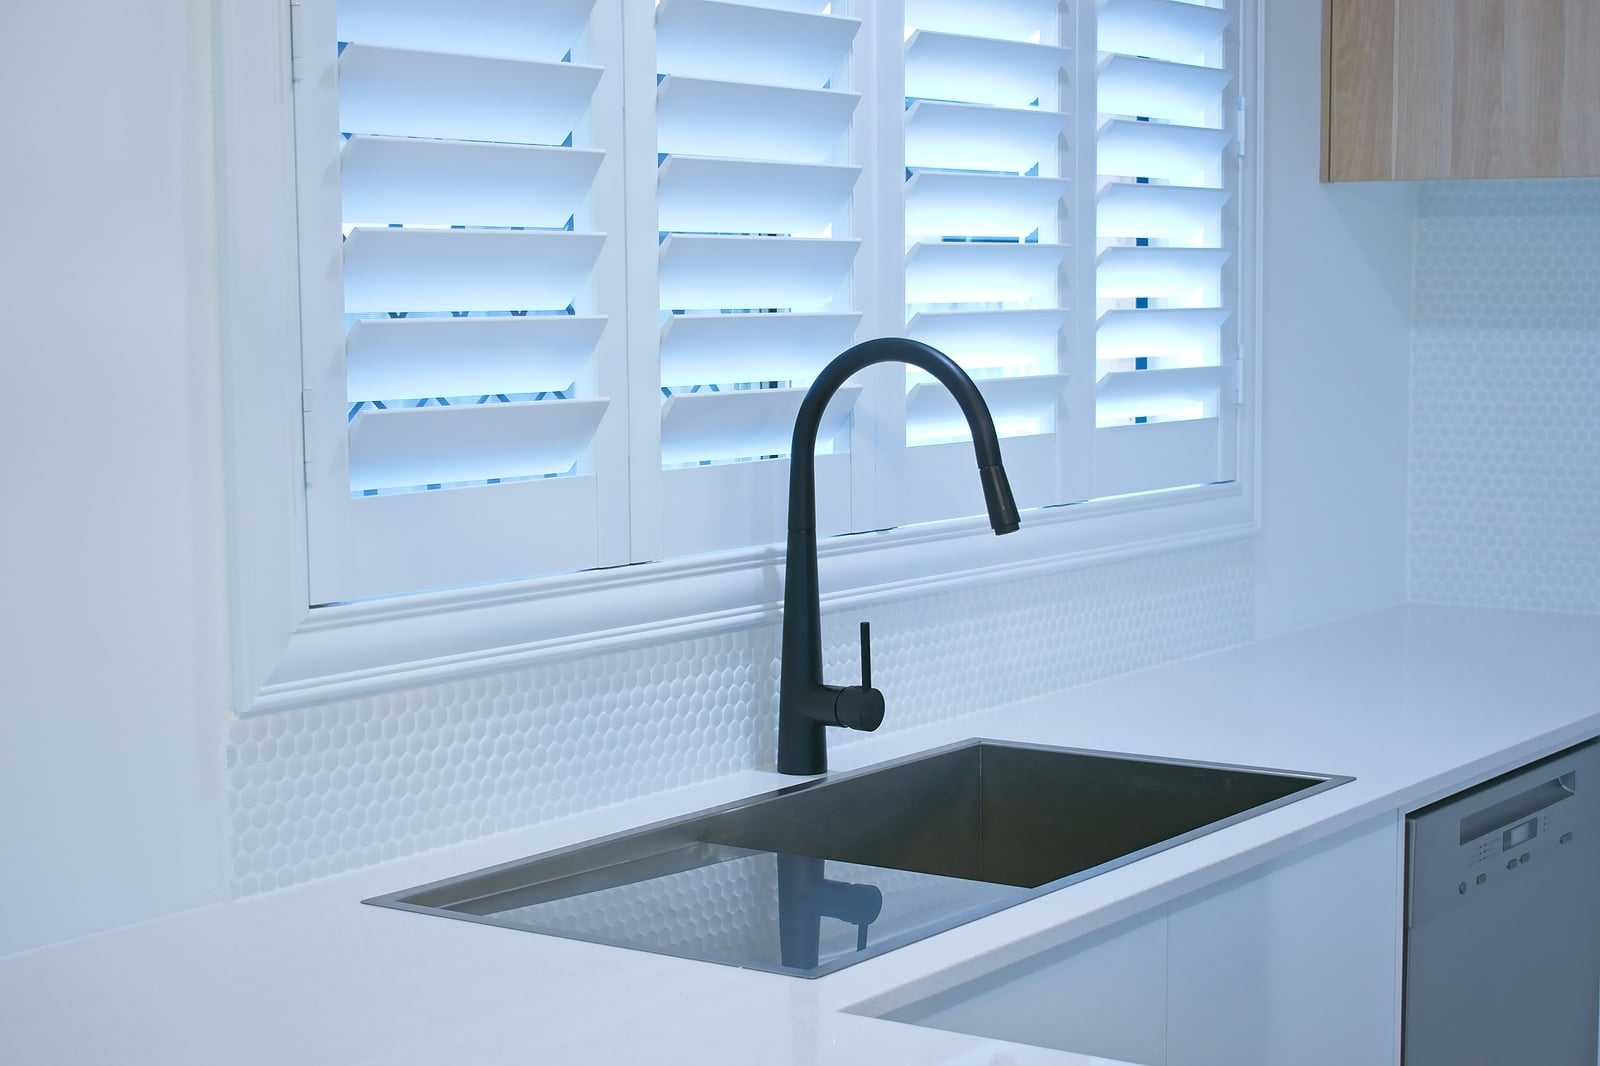 - Best Window Furnishings for Wet Areas in Your Home